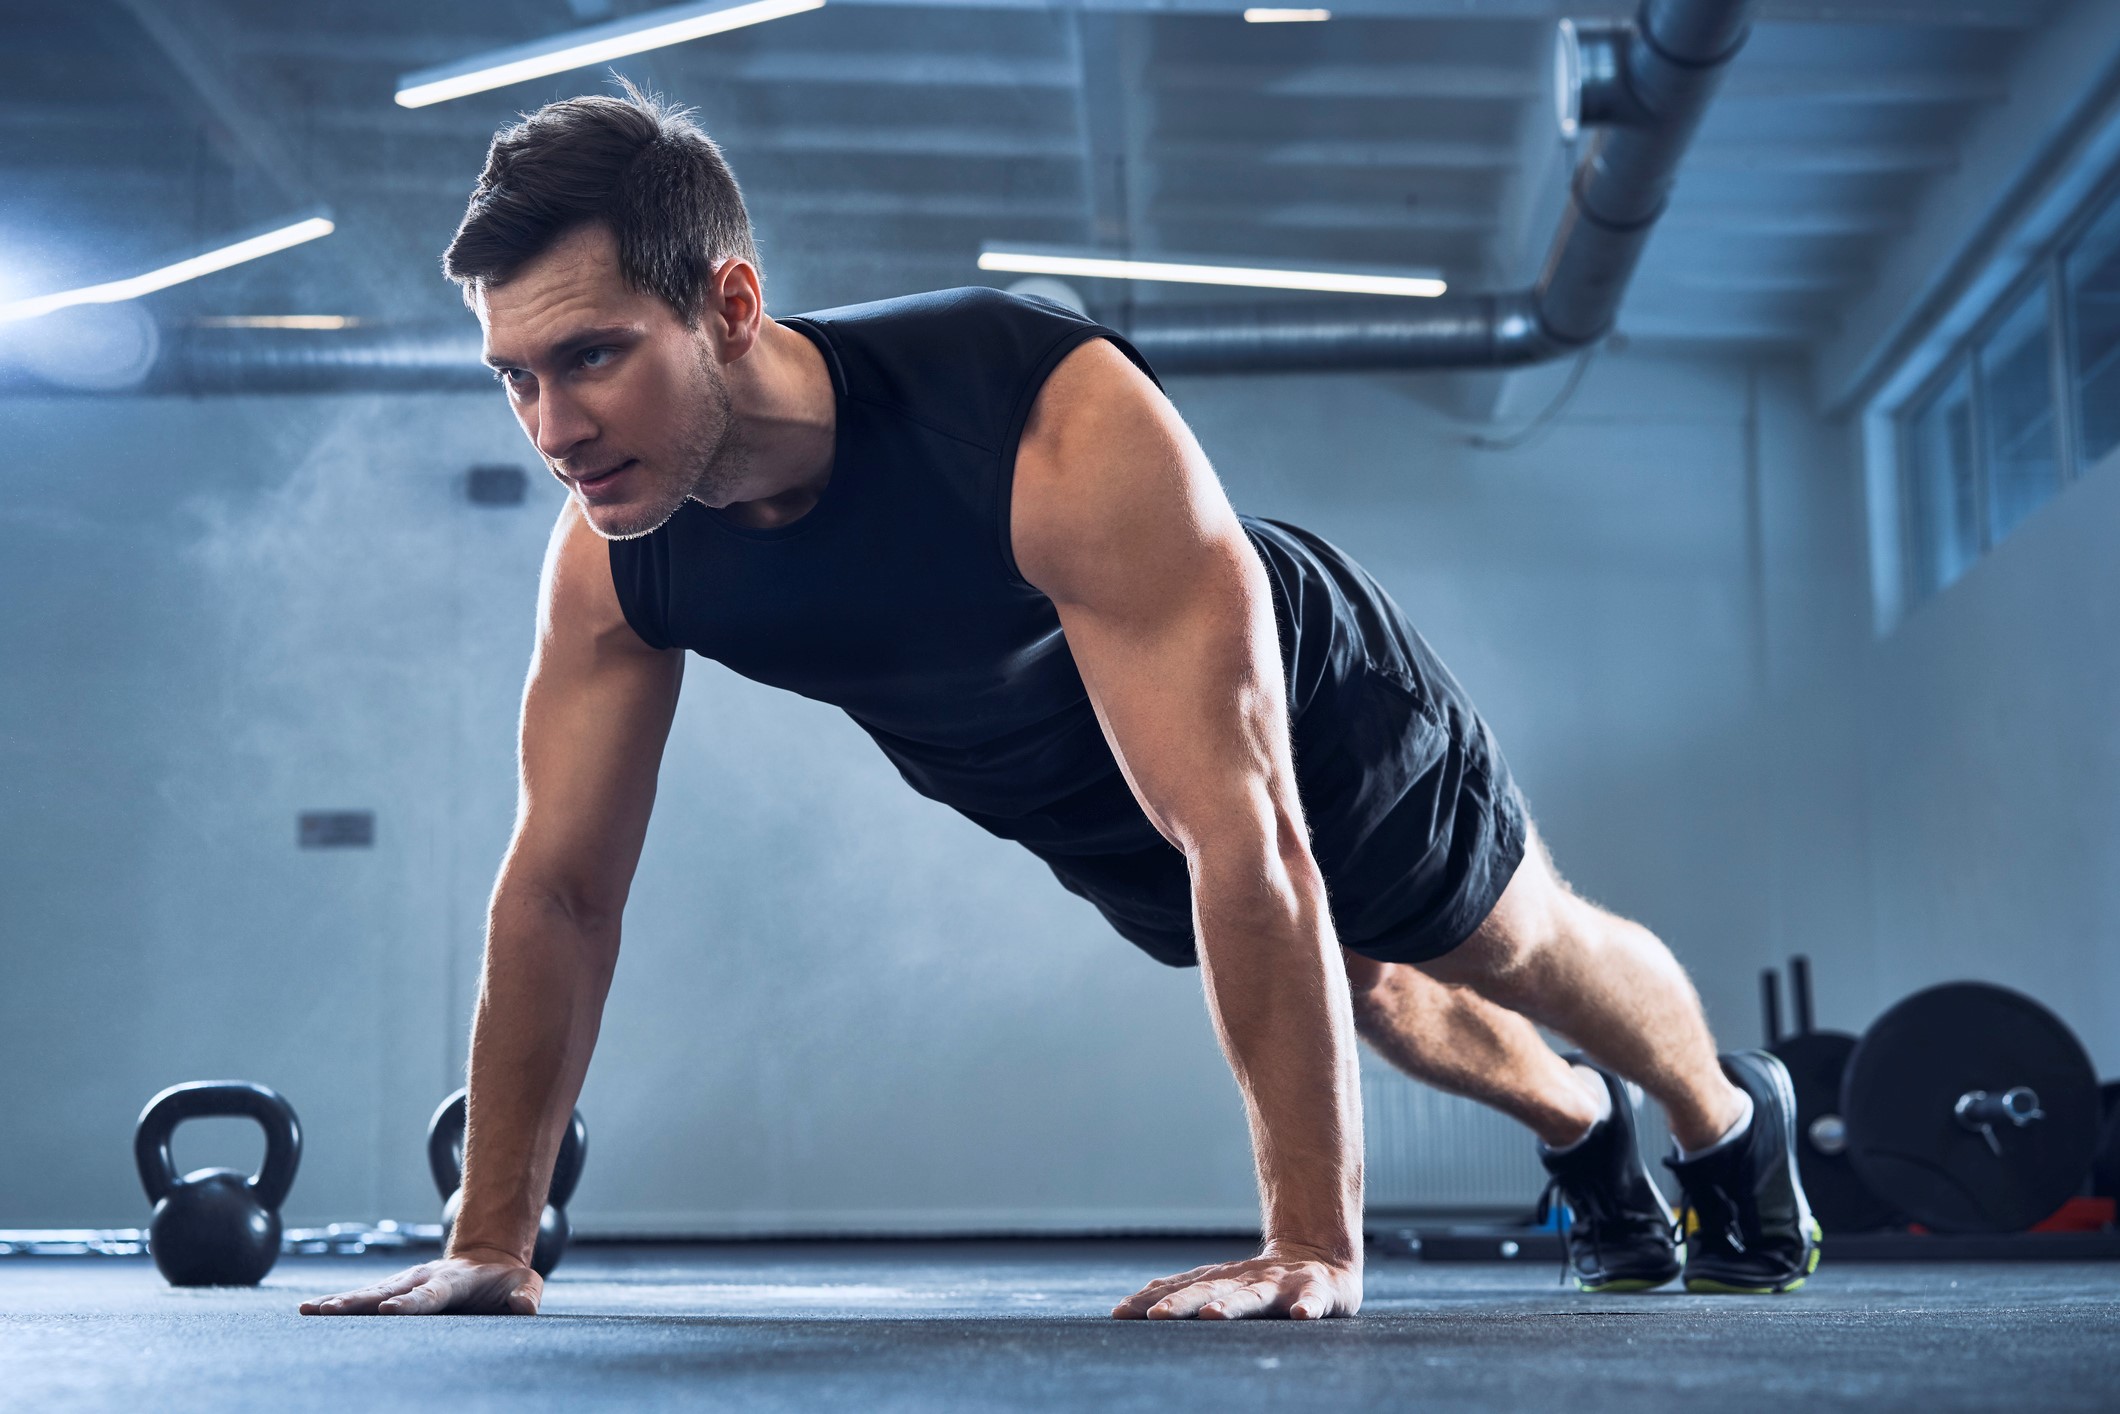 Top 10 muscle-building push-ups and progressions - The Fitness